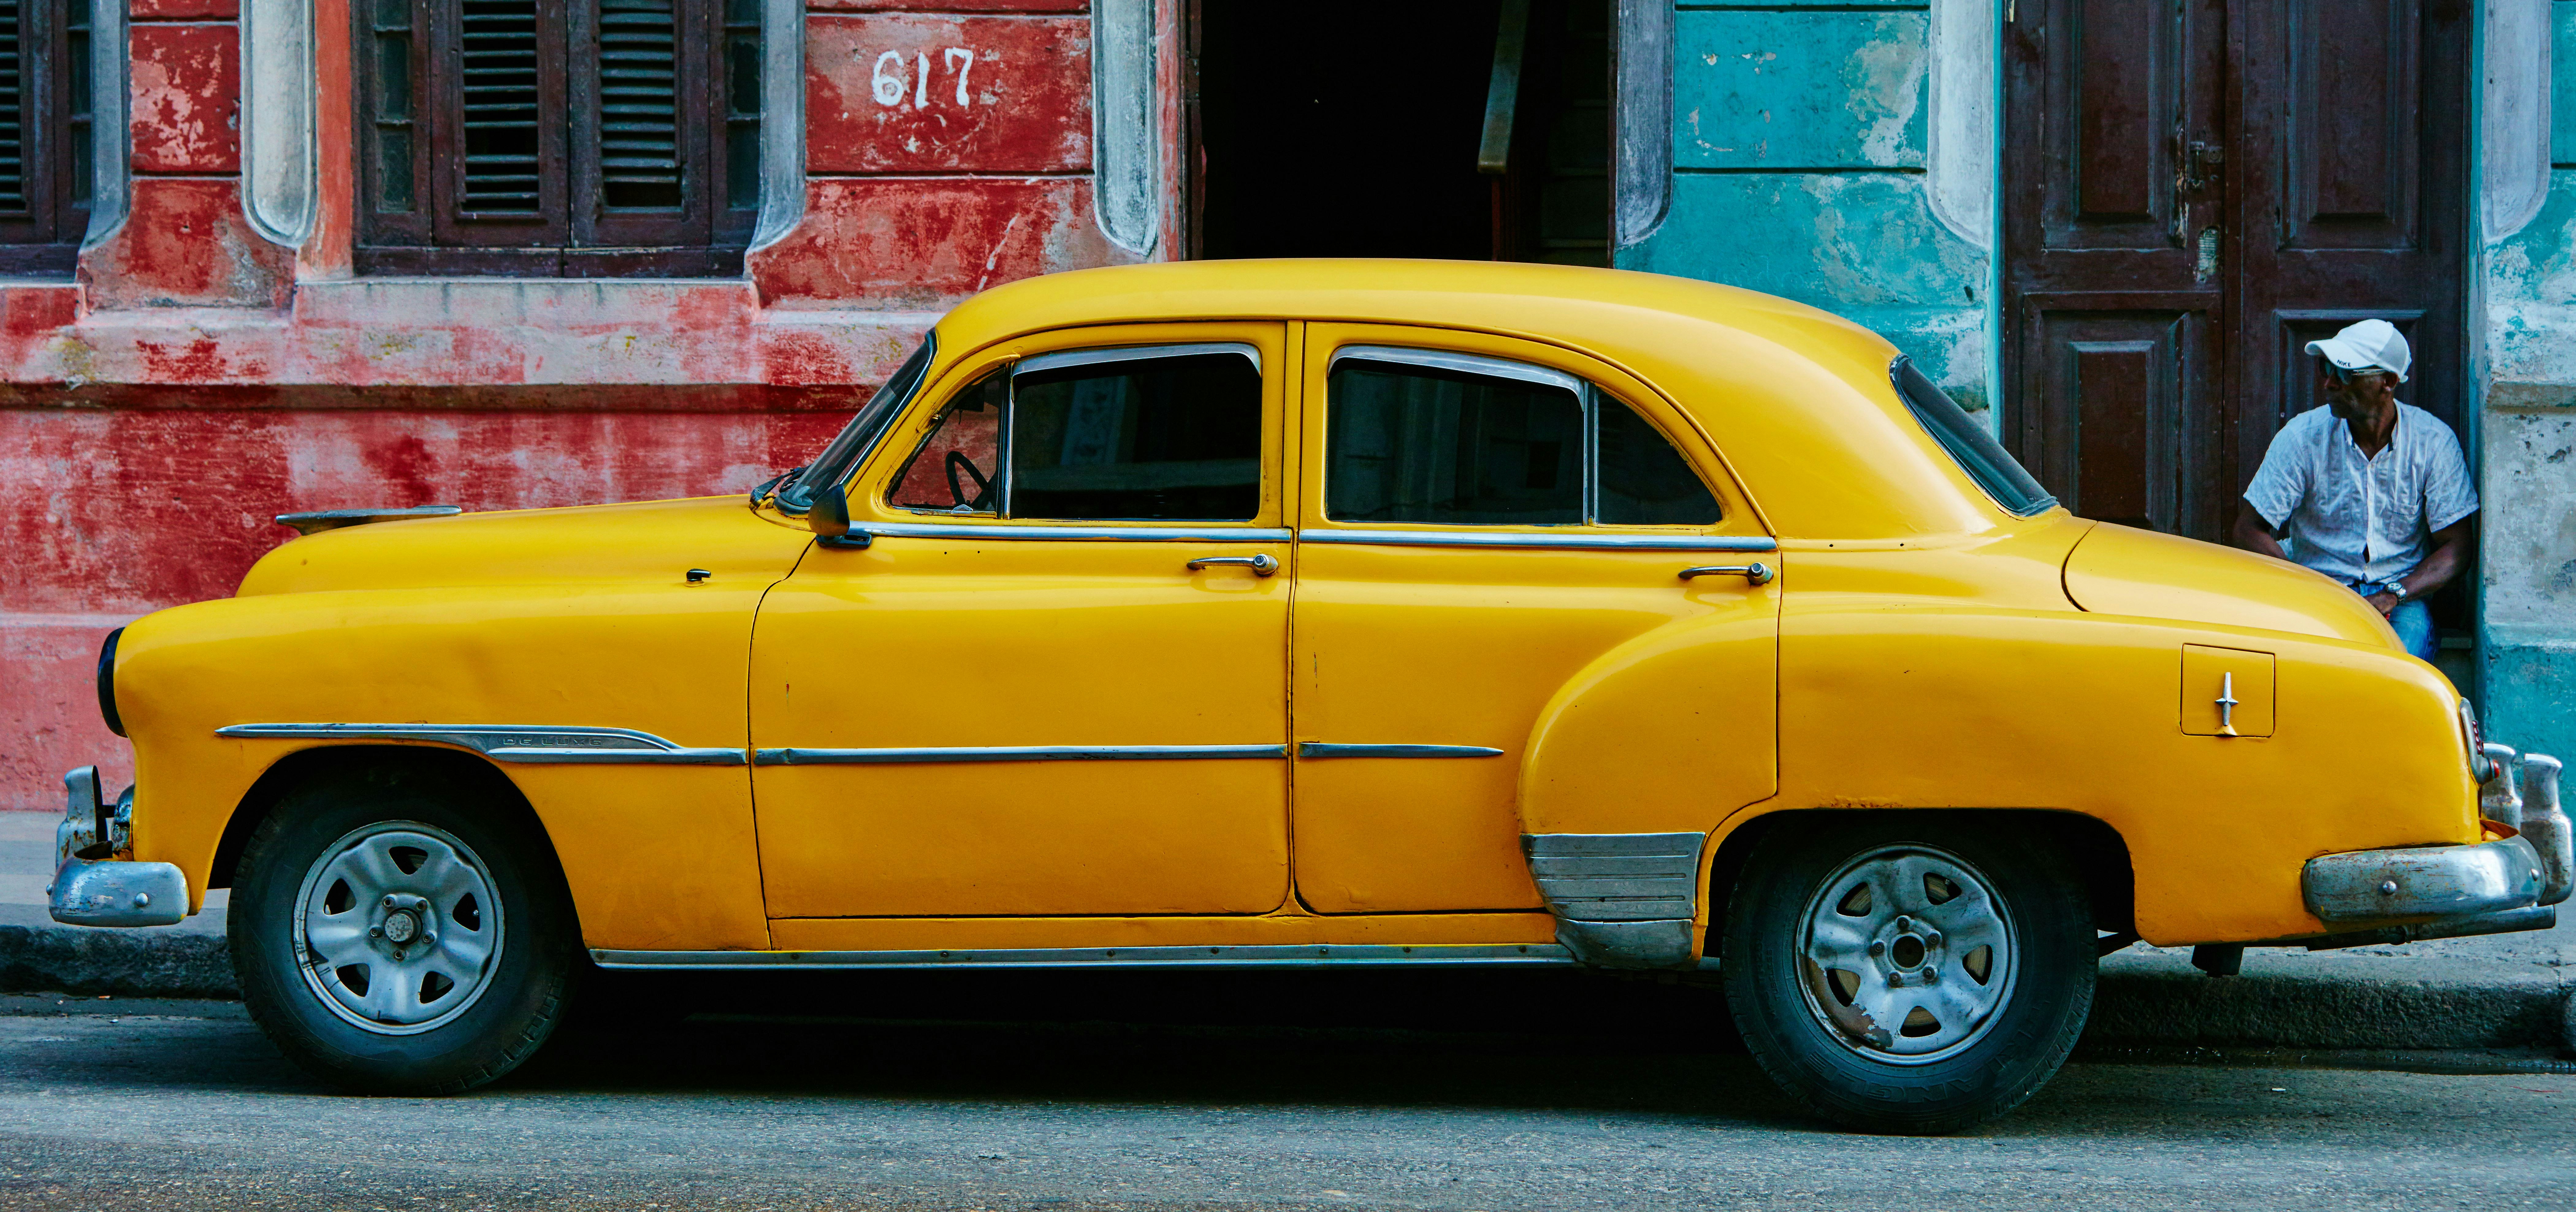 Yellow vintage car Havana Picture taken for FindByPlate - https://findbyplate.com